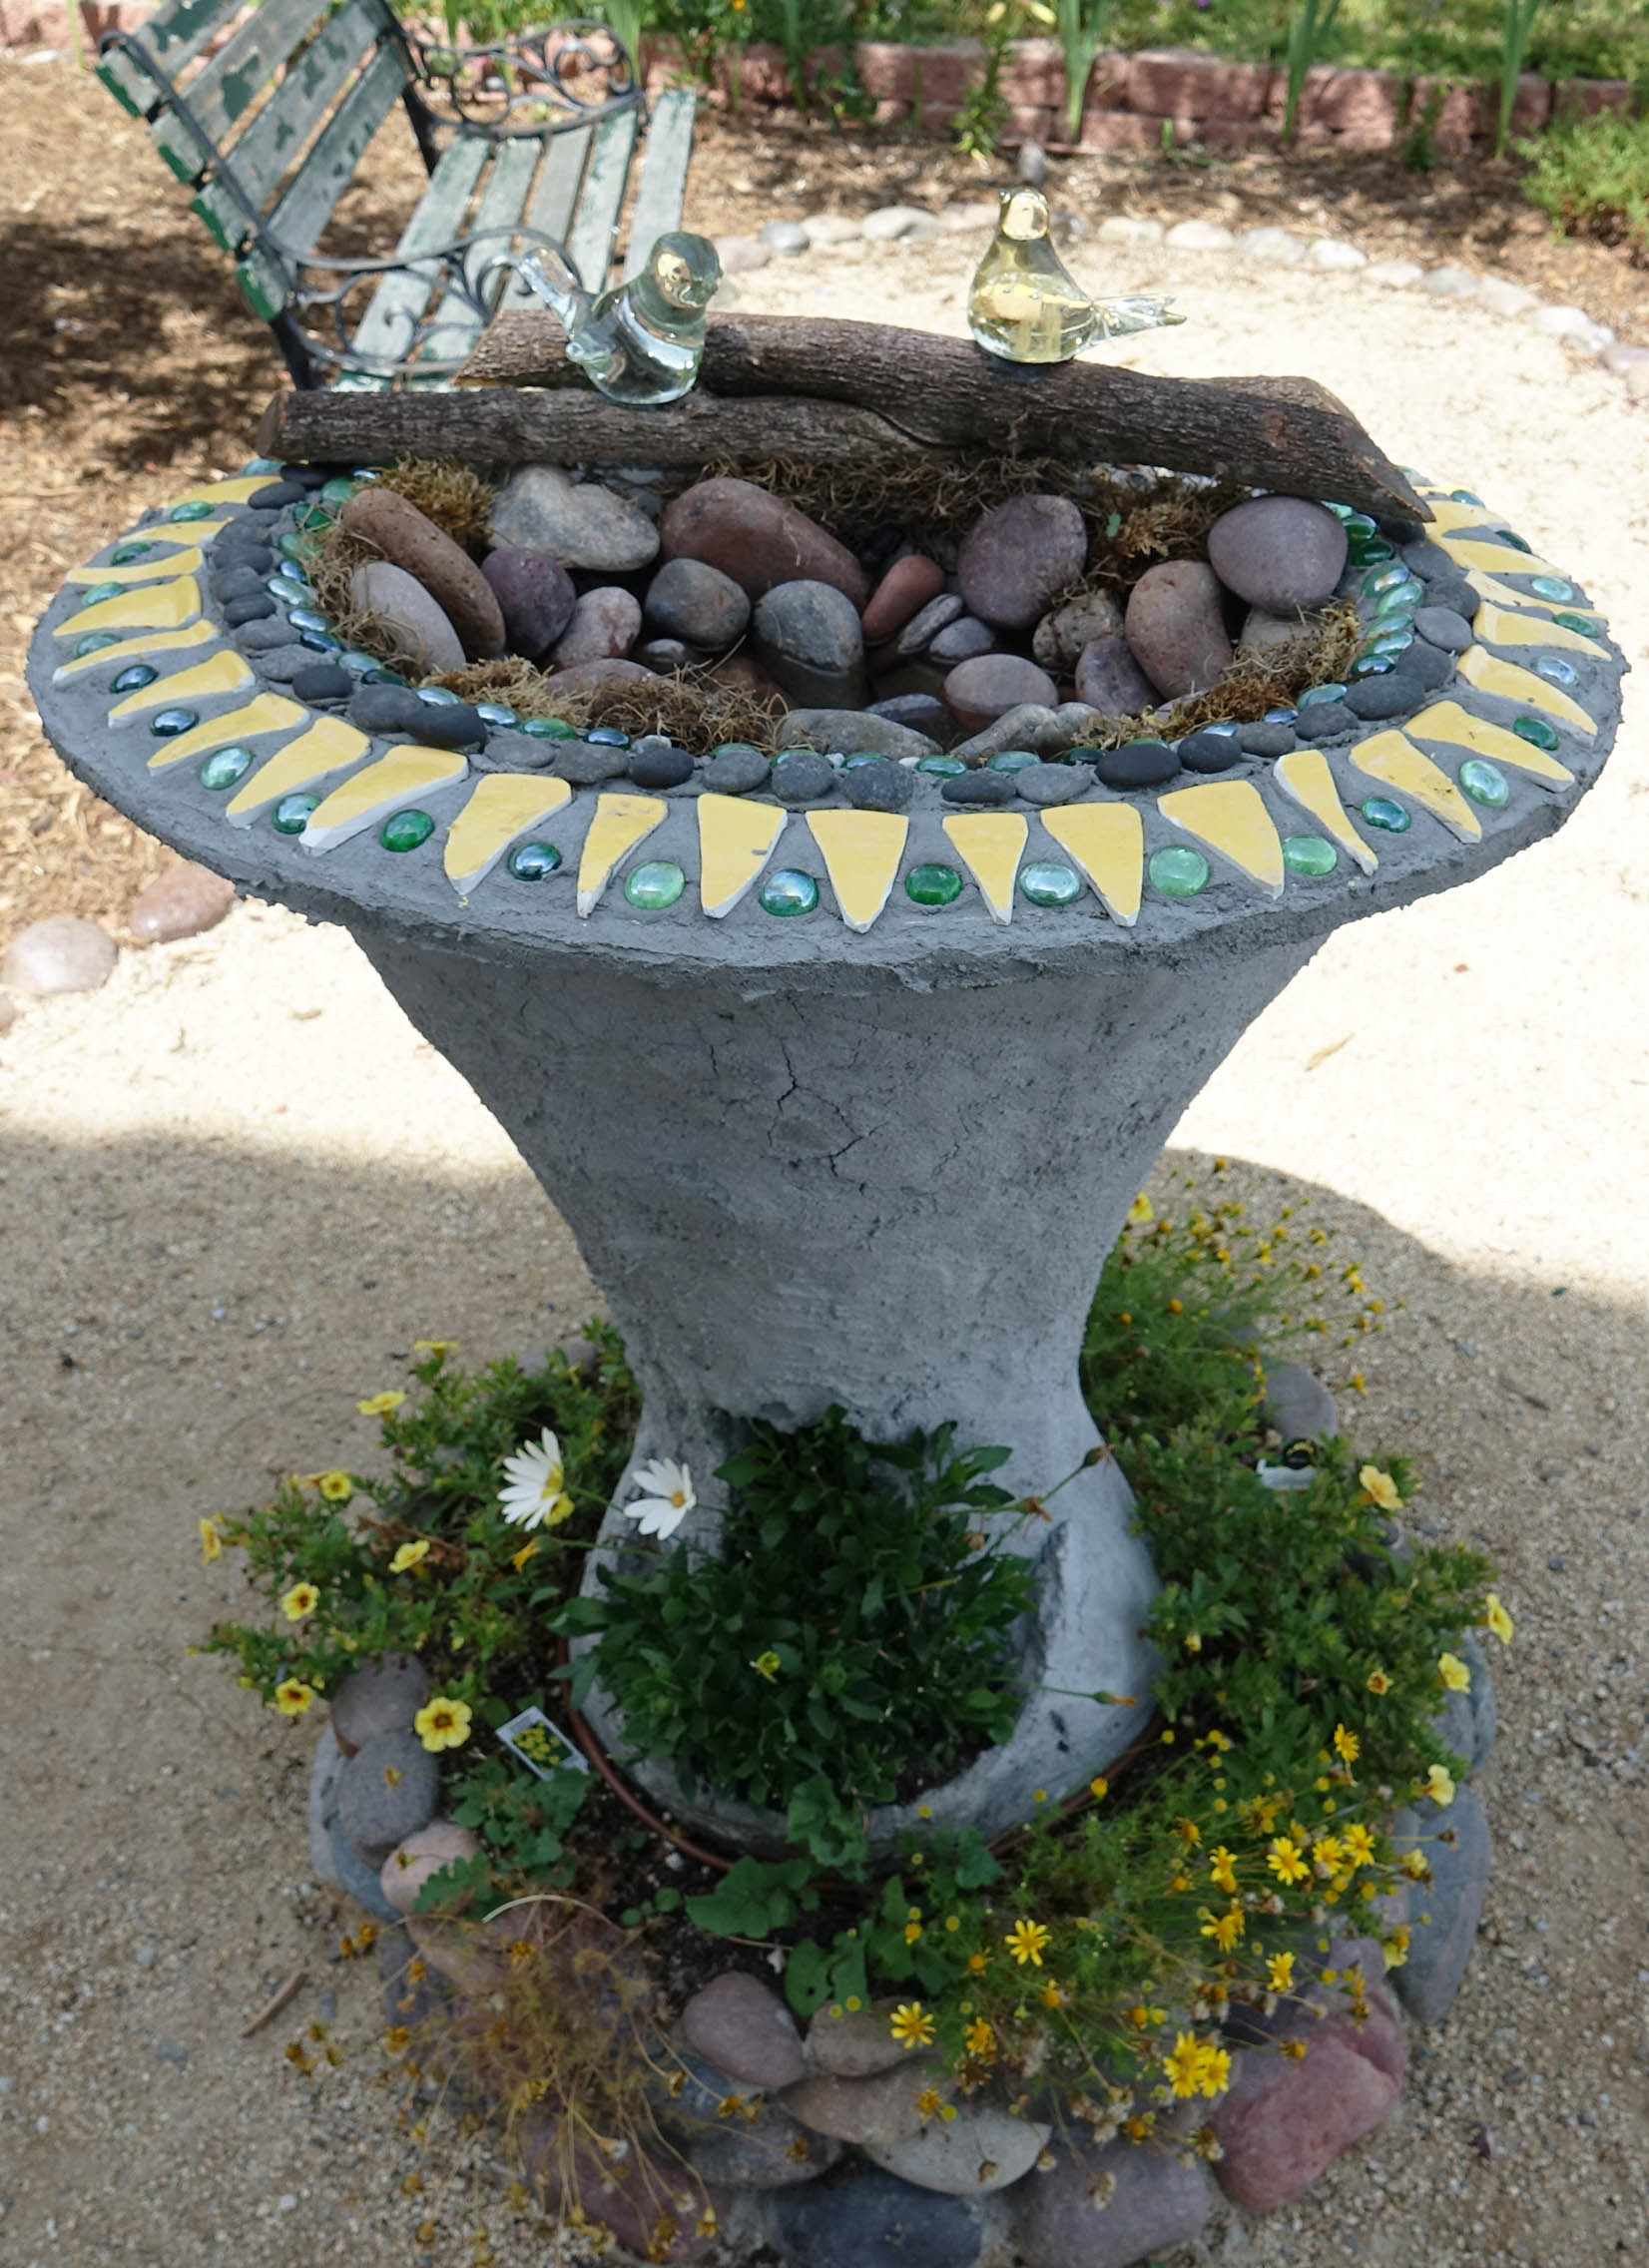 The top of the birdbath is decorated with pieces from a broken dish. 